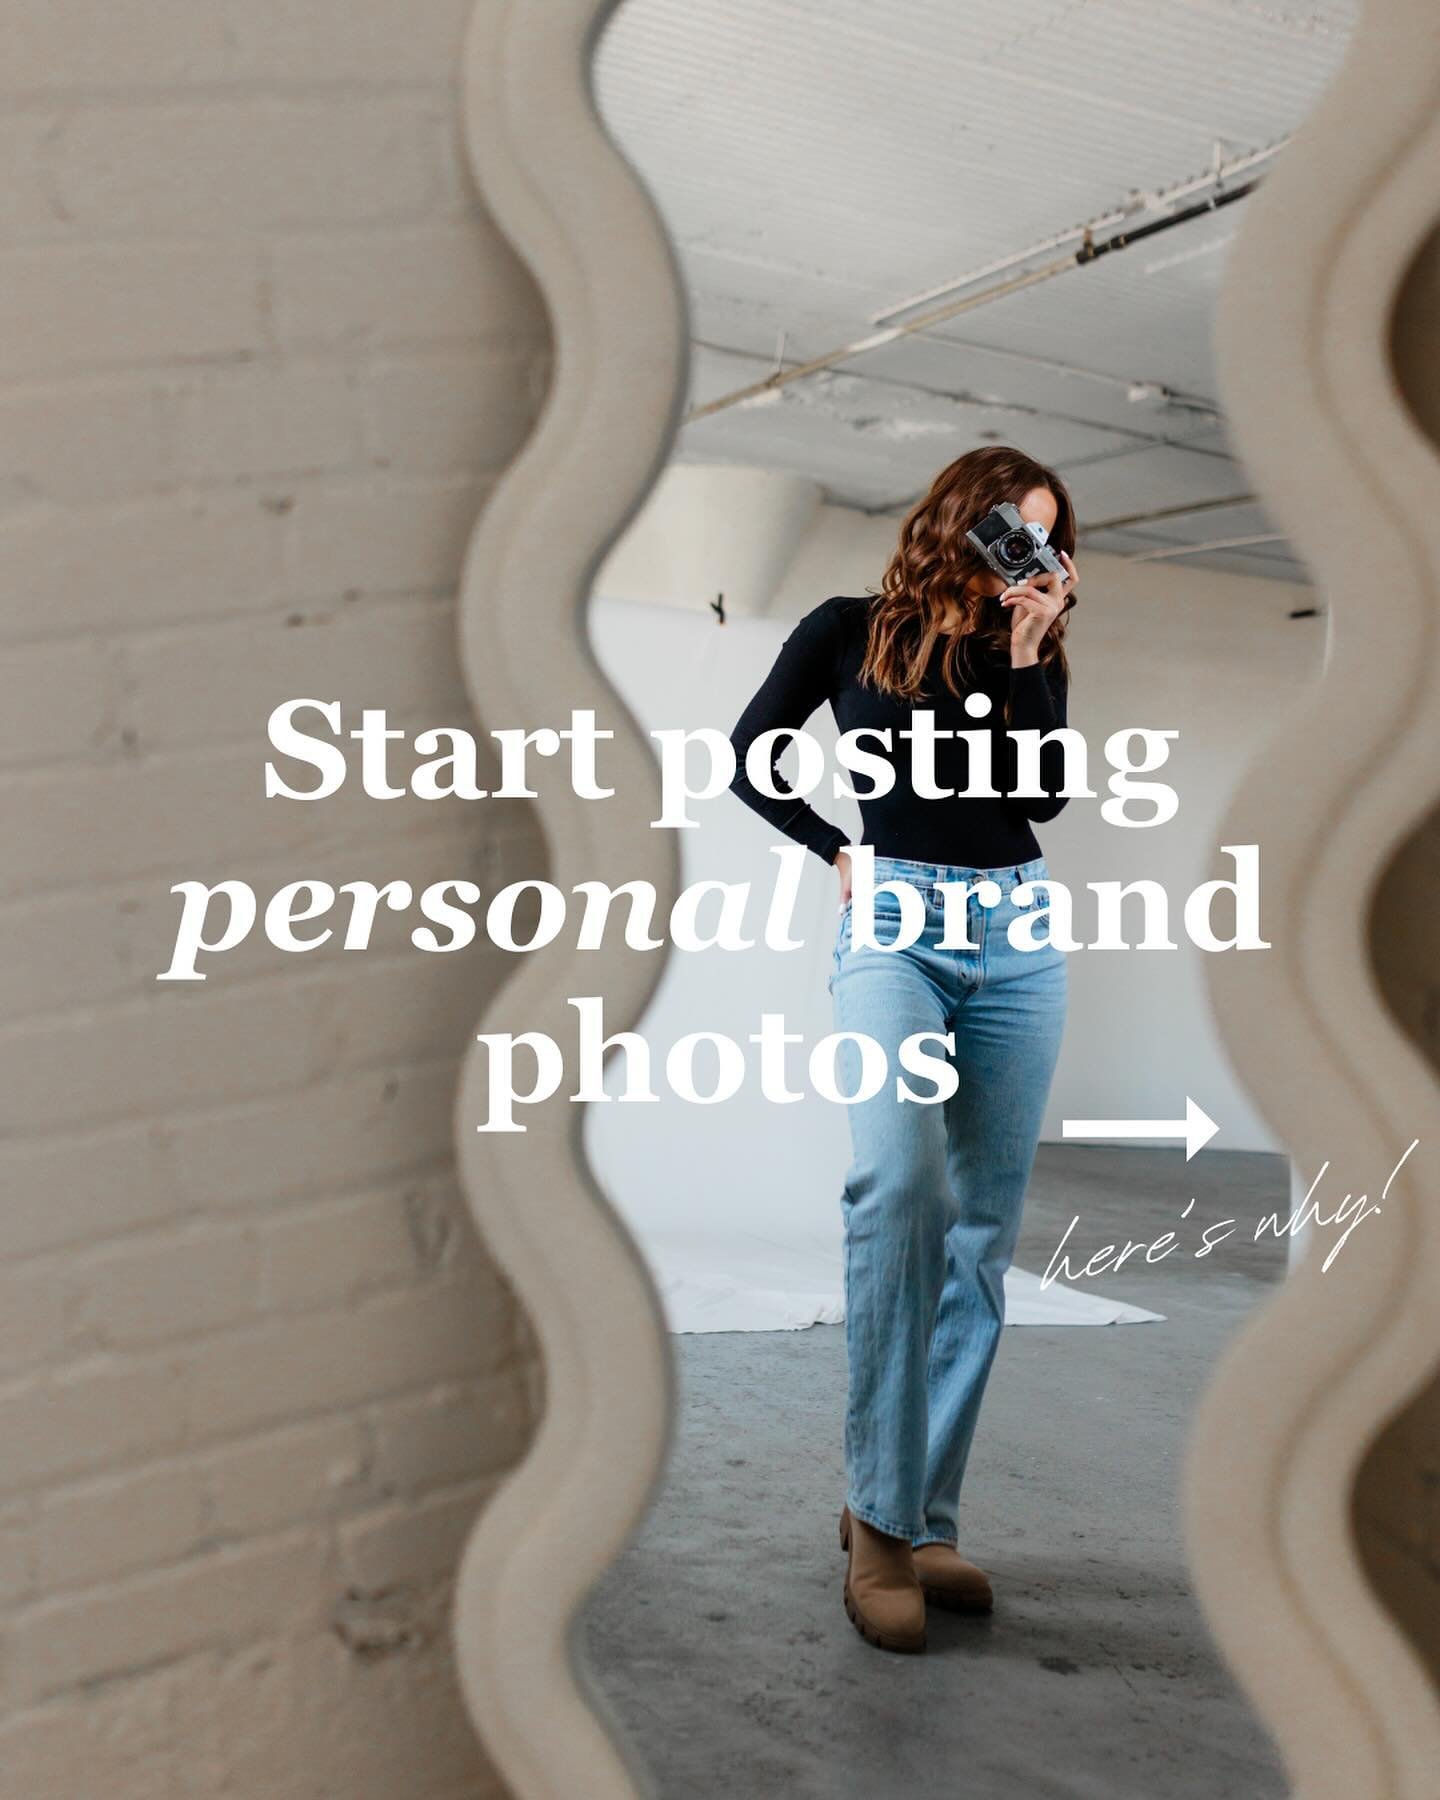 Here&rsquo;s your reminder to start posting personal brand photos! 📸

Here&rsquo;s why:

1. They build consistency 
2. They tell a story 
3. They create connection 

If you don&rsquo;t have personal brand photos yet, I&rsquo;d love to chat! Follow t